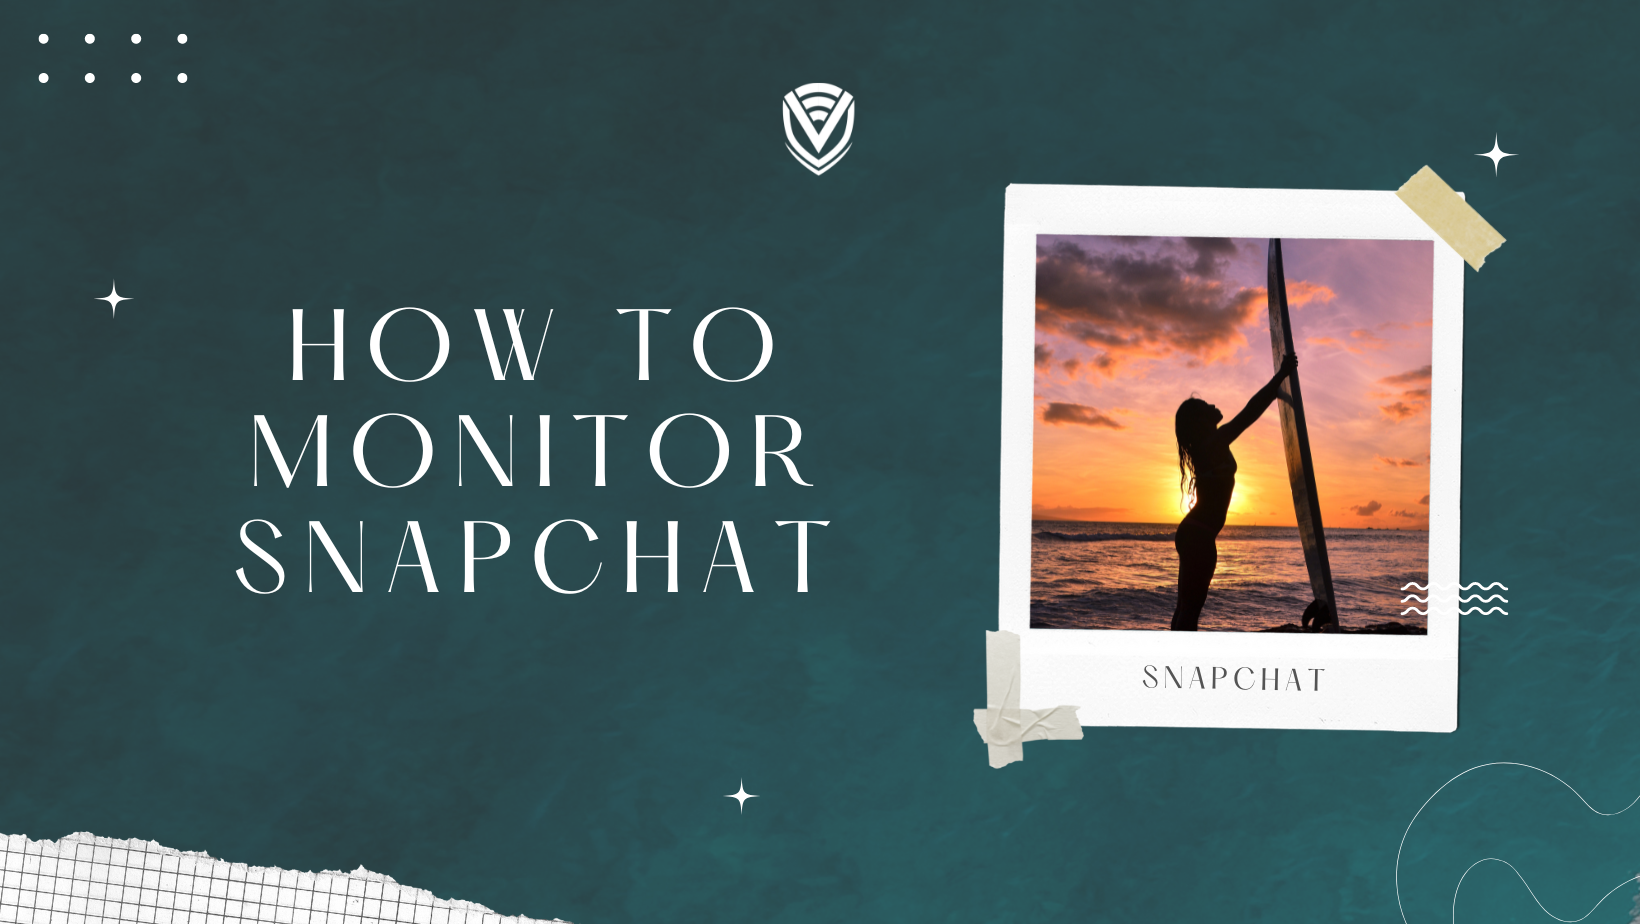 How to Monitor Snapchat